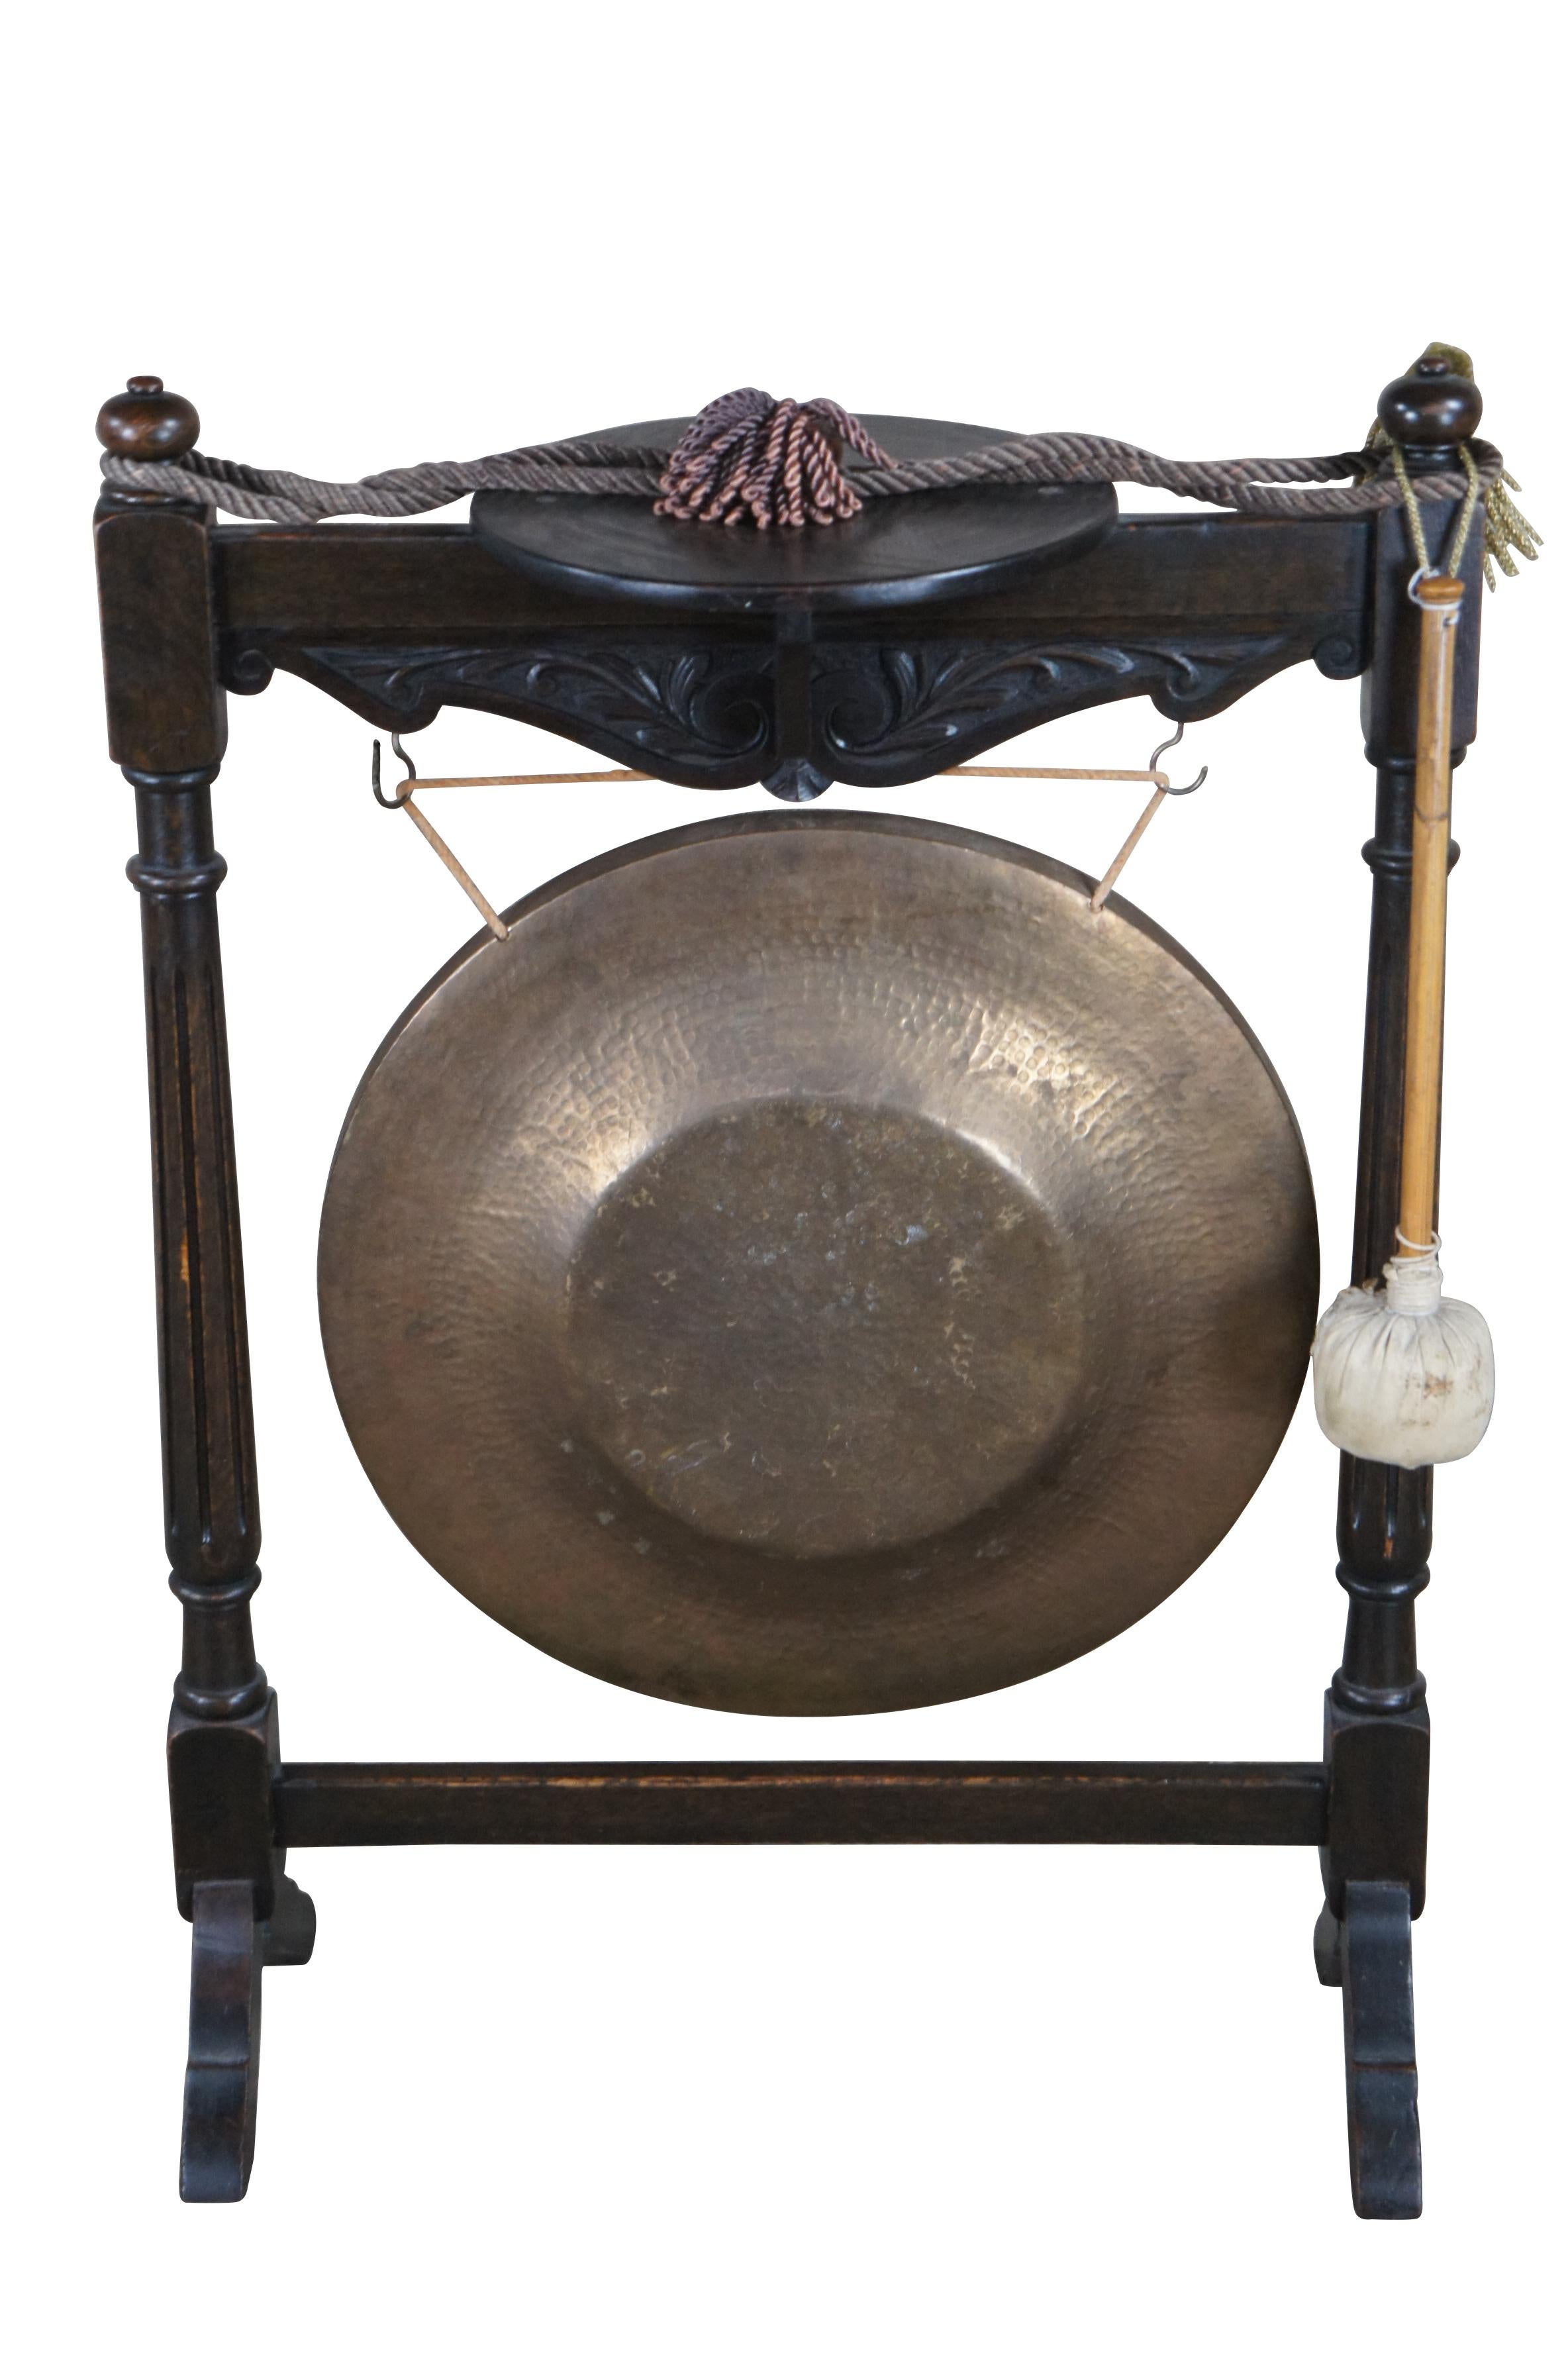 Early 1900s Edwardian floor standing dinner gong with pedestal.  Made from oak with an ornate serpentine foliate carved rail beneath rounded sculpture pedestal support.  The stand is supported by fluted columns leading to splayed legs.  Central gong